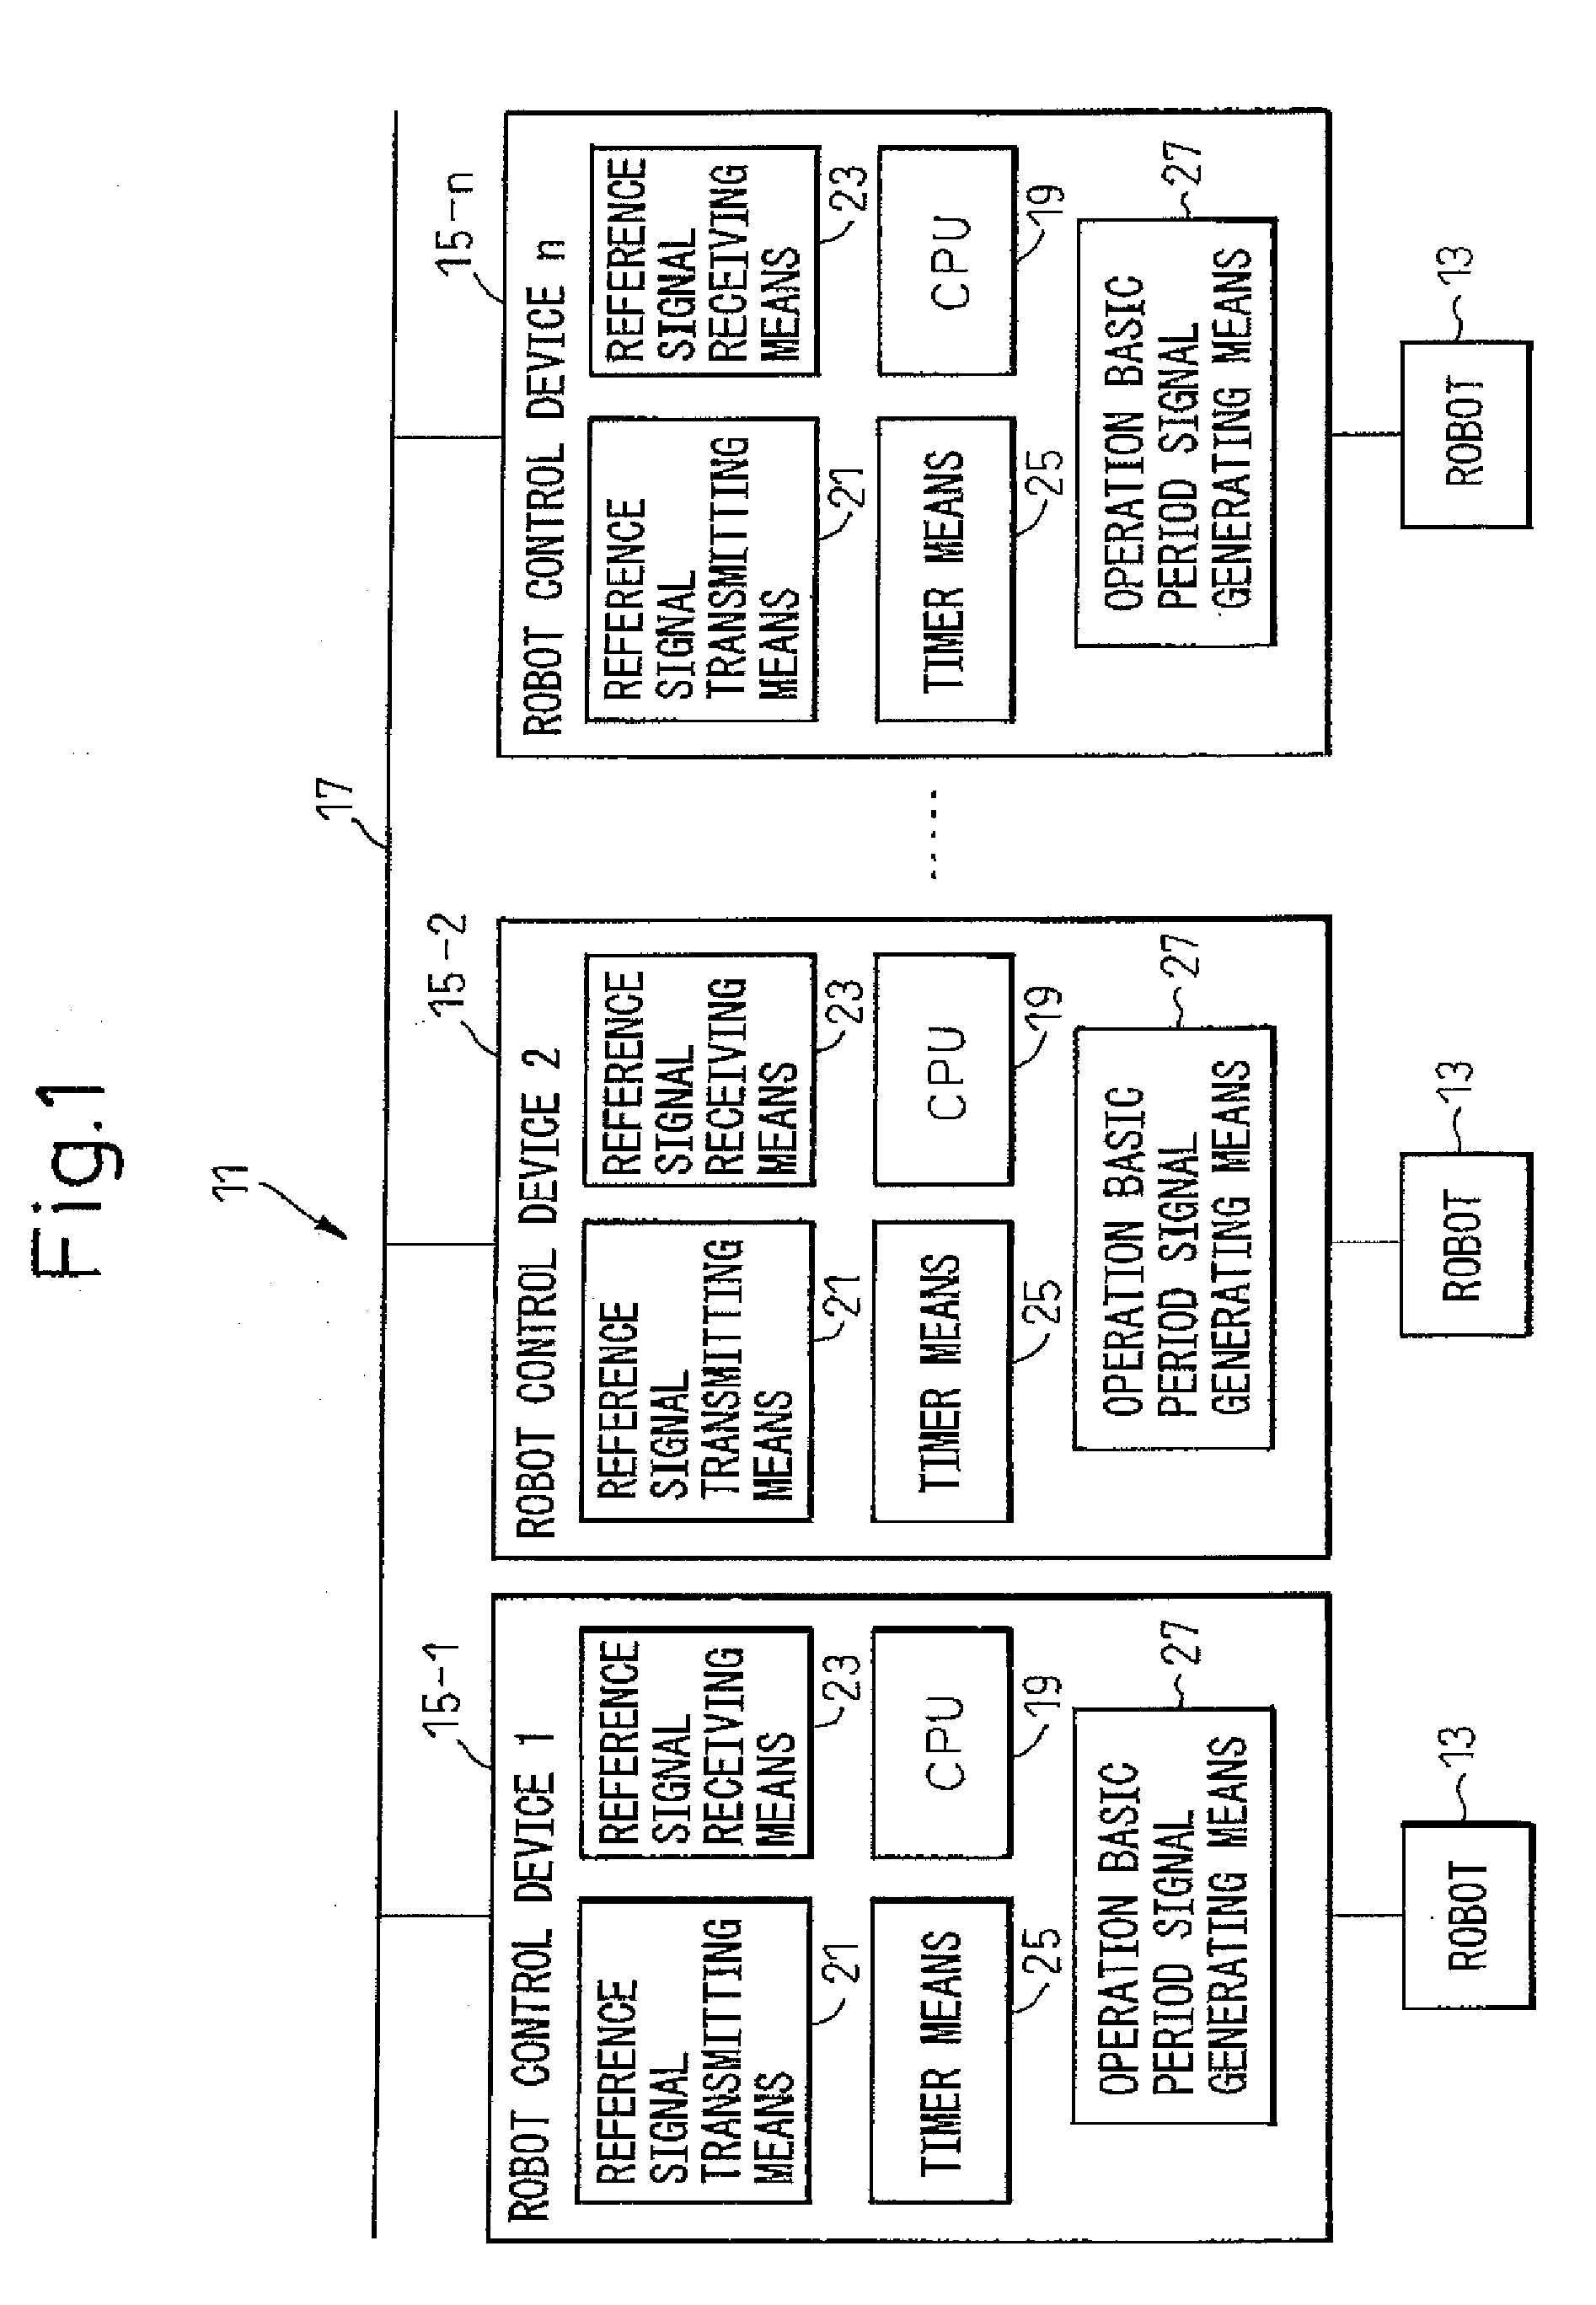 Robot coordinated control method and system